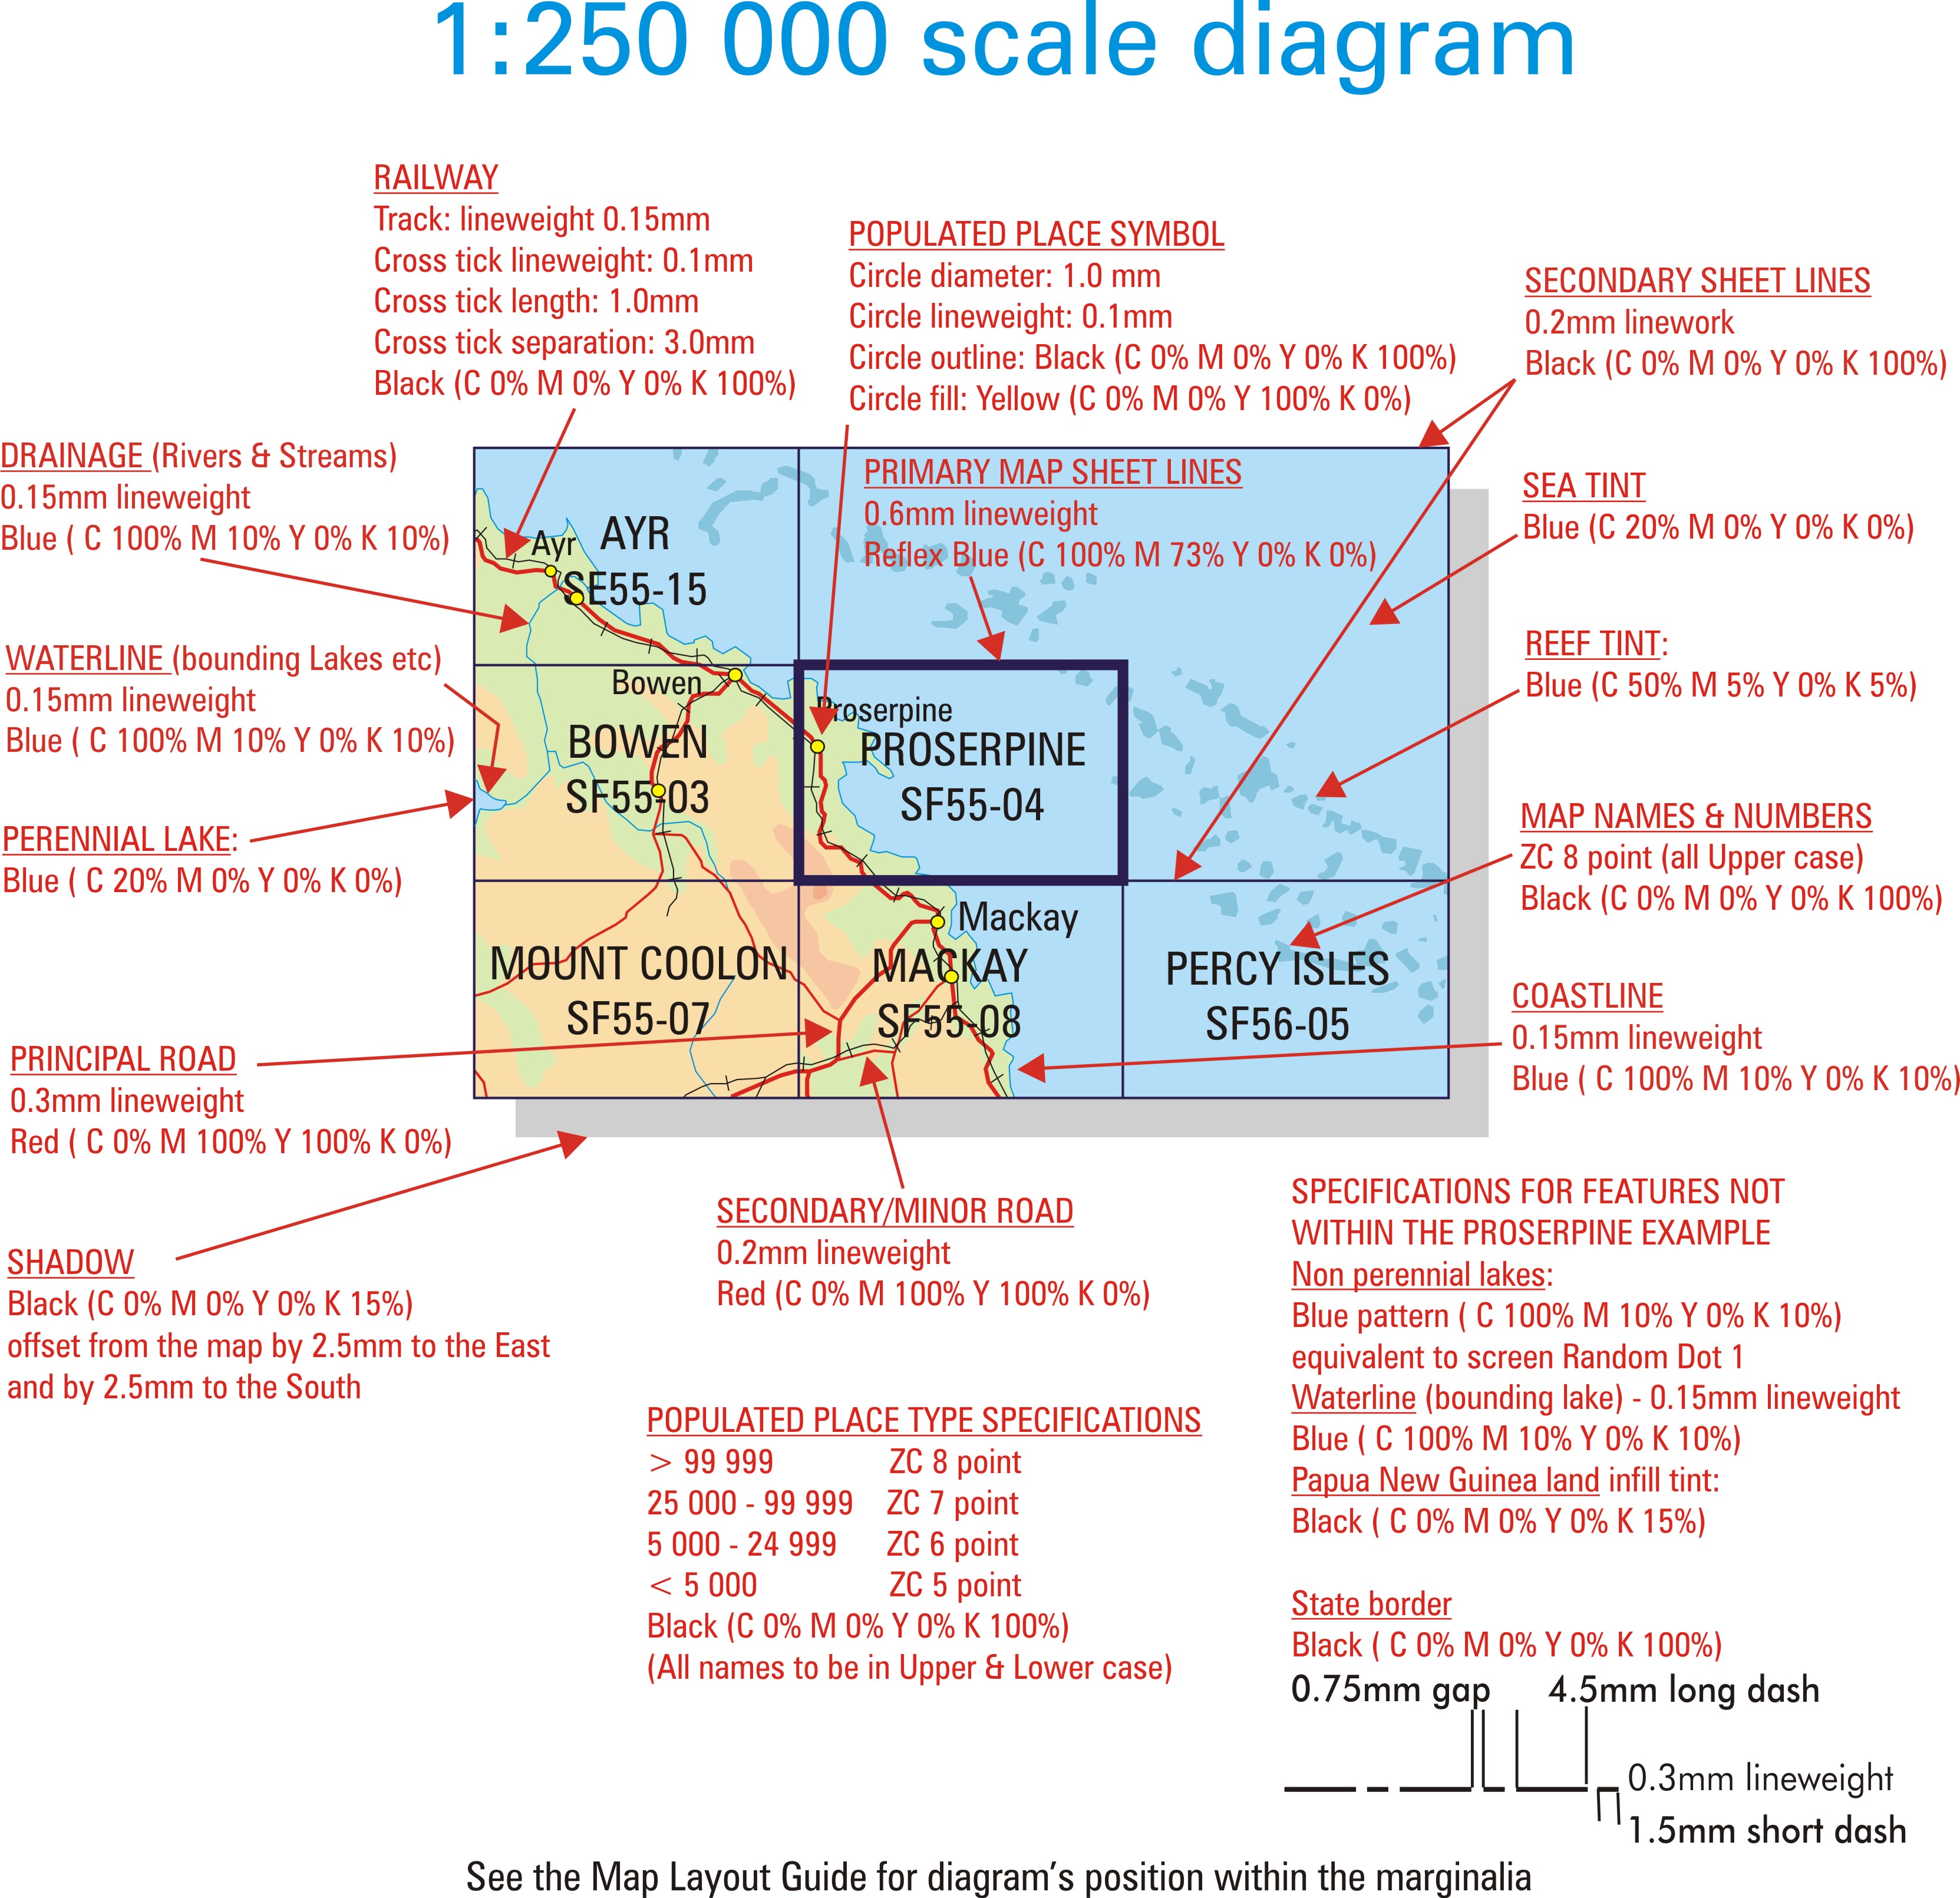 Locality Diagram for 1:250 000